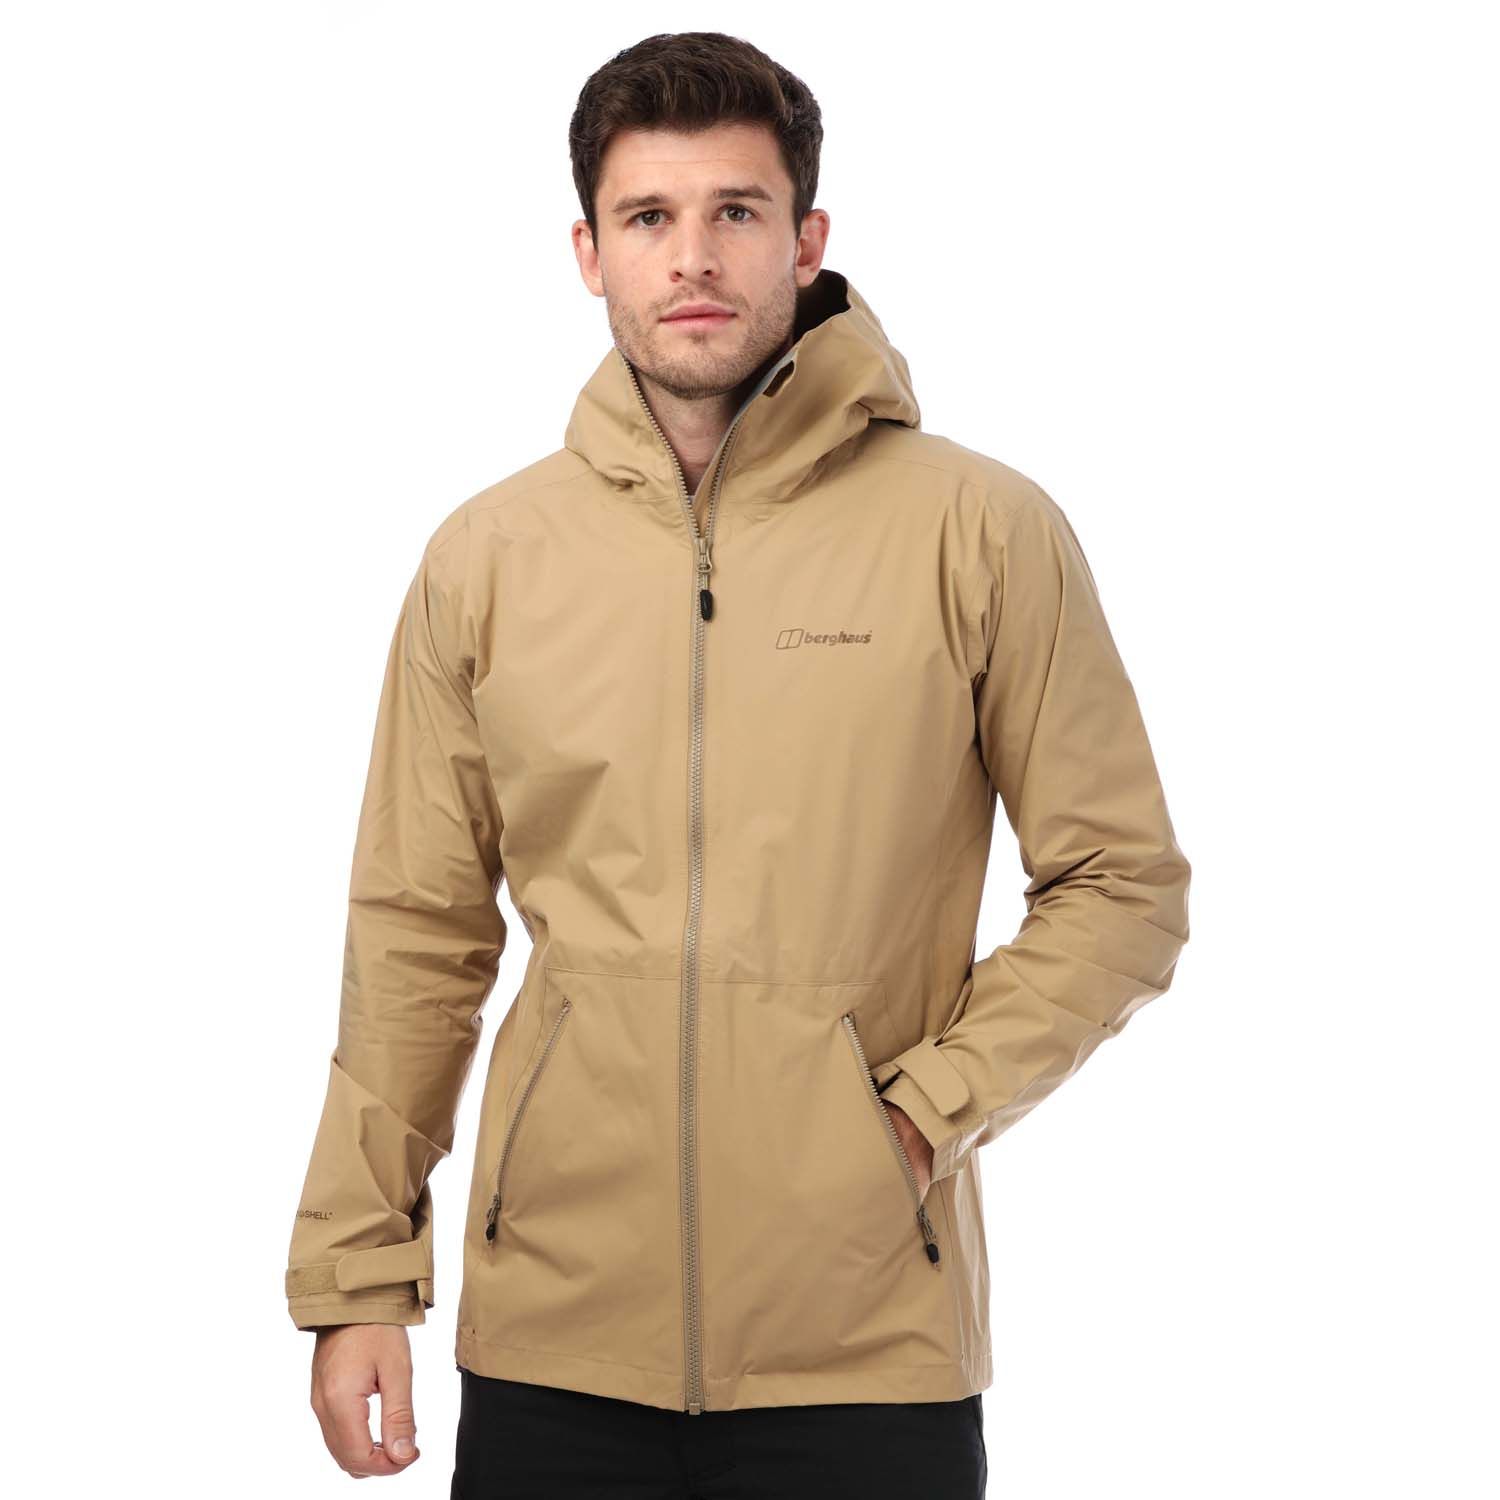 Berghaus Mens Deluge Pro 2 Shell Jacket in Natural